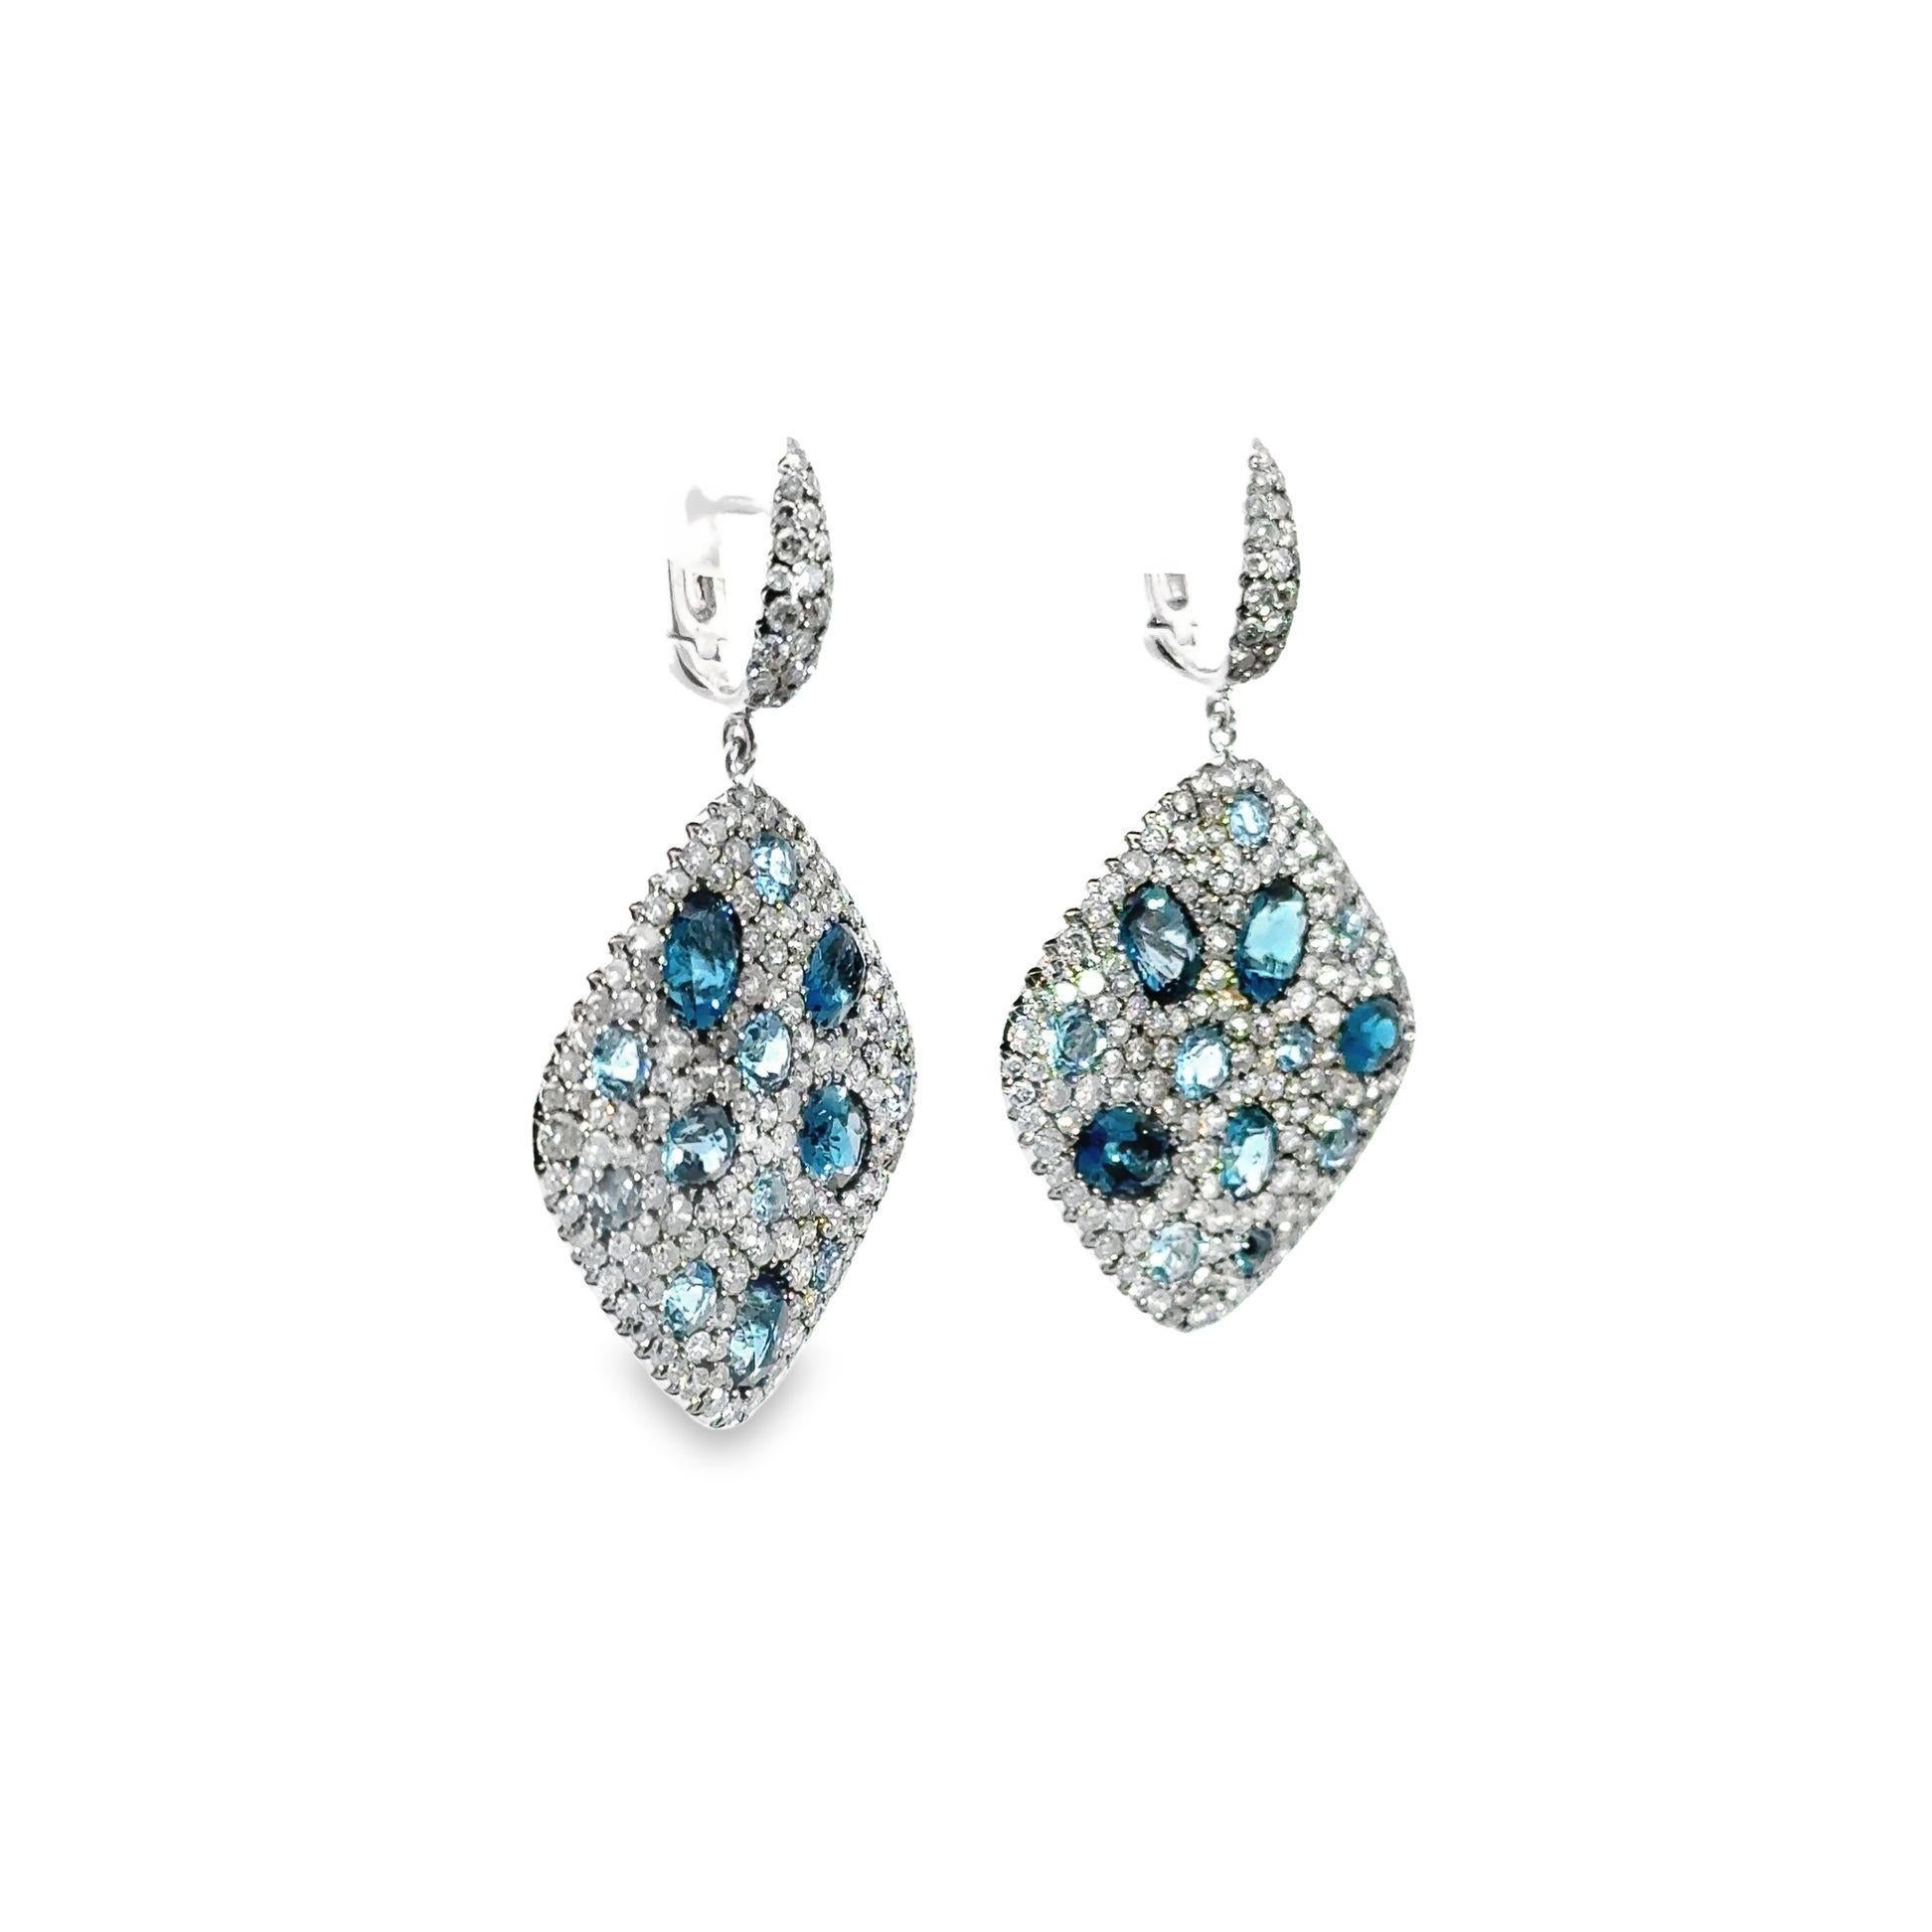 Adorn yourself with these exquisite blue earrings made with 7.75 carats of dazzling round cut diamonds. The deep hue of blue topaz, weighing 9.70 carats, creating a captivating dynamic to catch the eye. Their elegant design exudes sophistication,